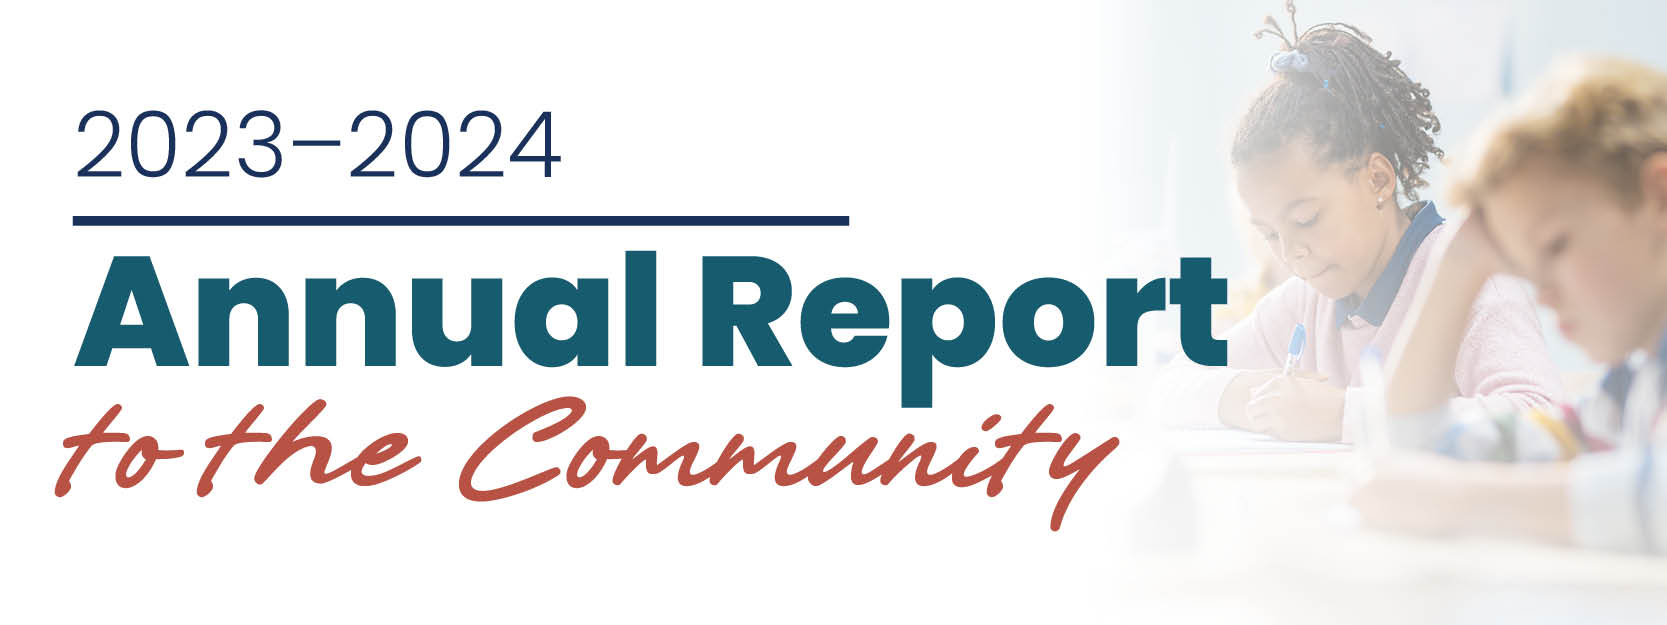 2023 Report To The Community